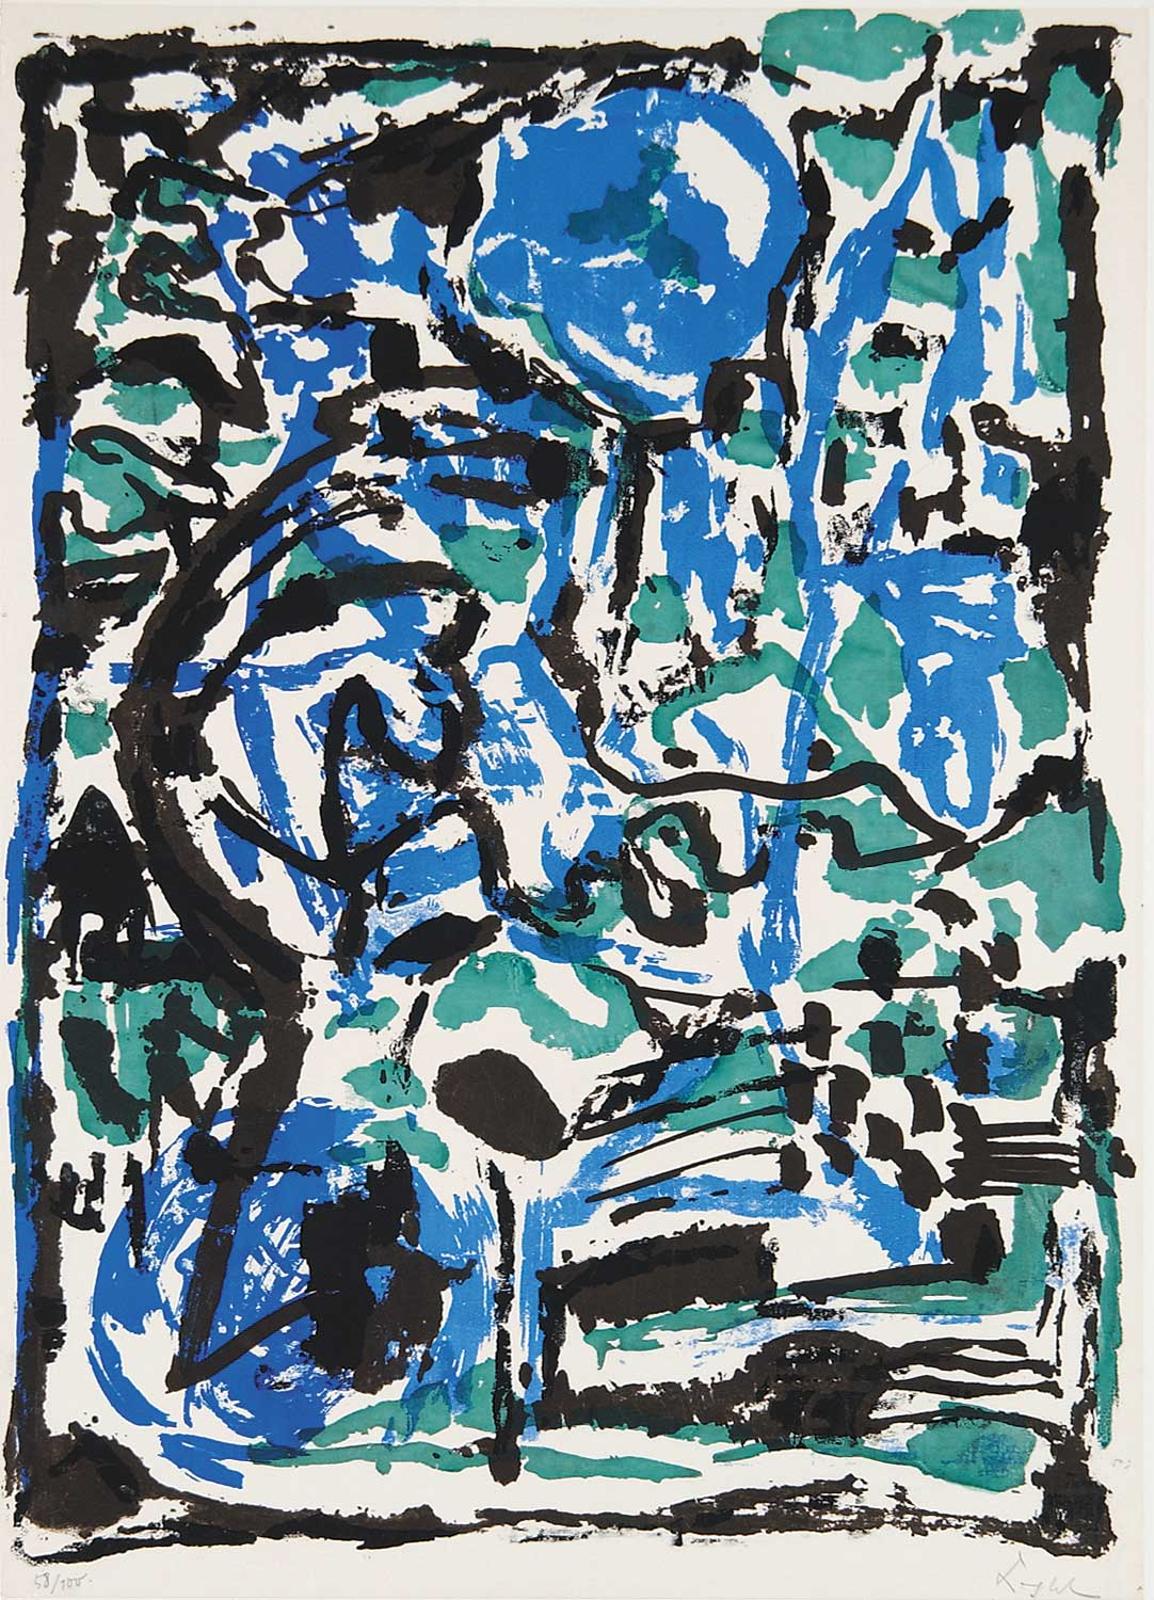 A.R. Penck (1939-2017) - Untitled - Abstract in Blue, Green and Black  #58/100